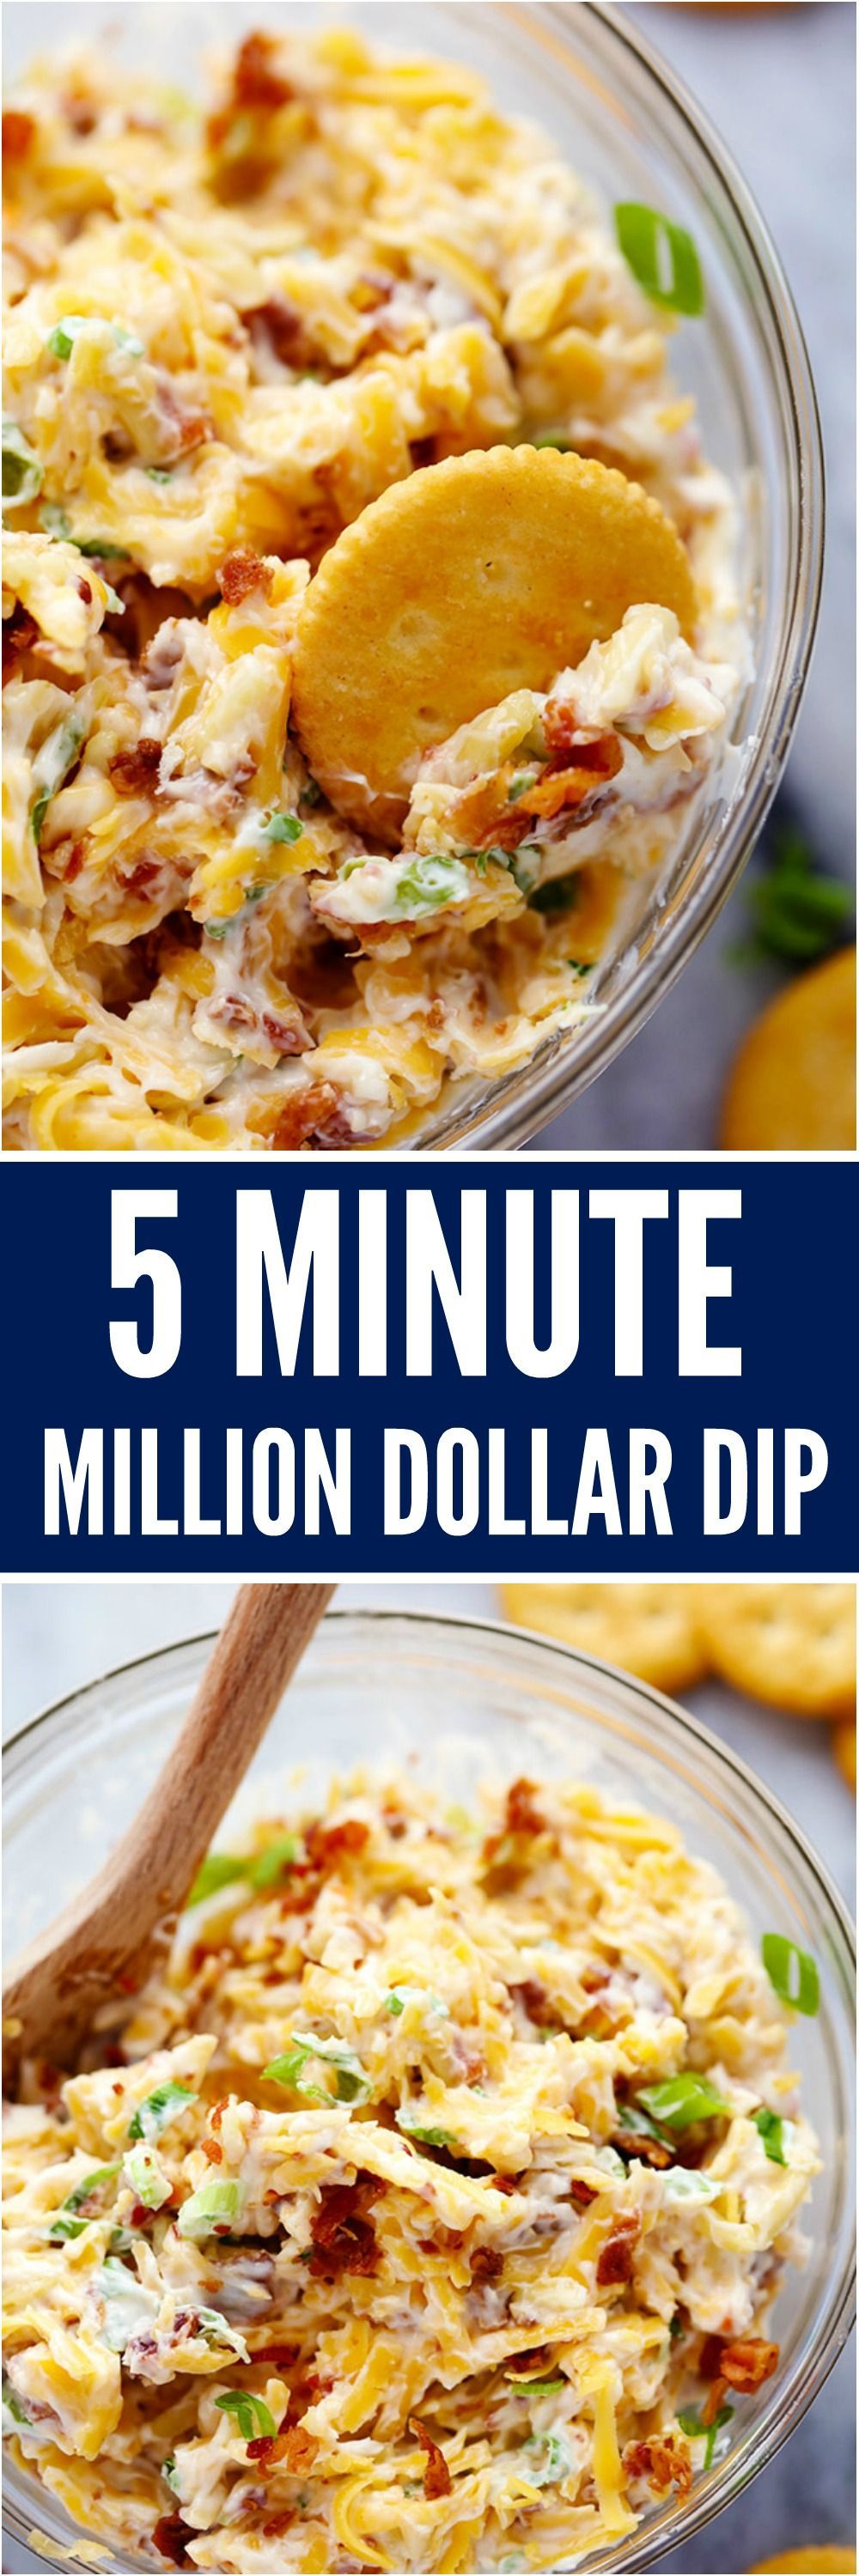 5 Million Dollar Dip is only 5 ingredients and they don’t call it million dollar dip for nothing! It is so deliciously addicting